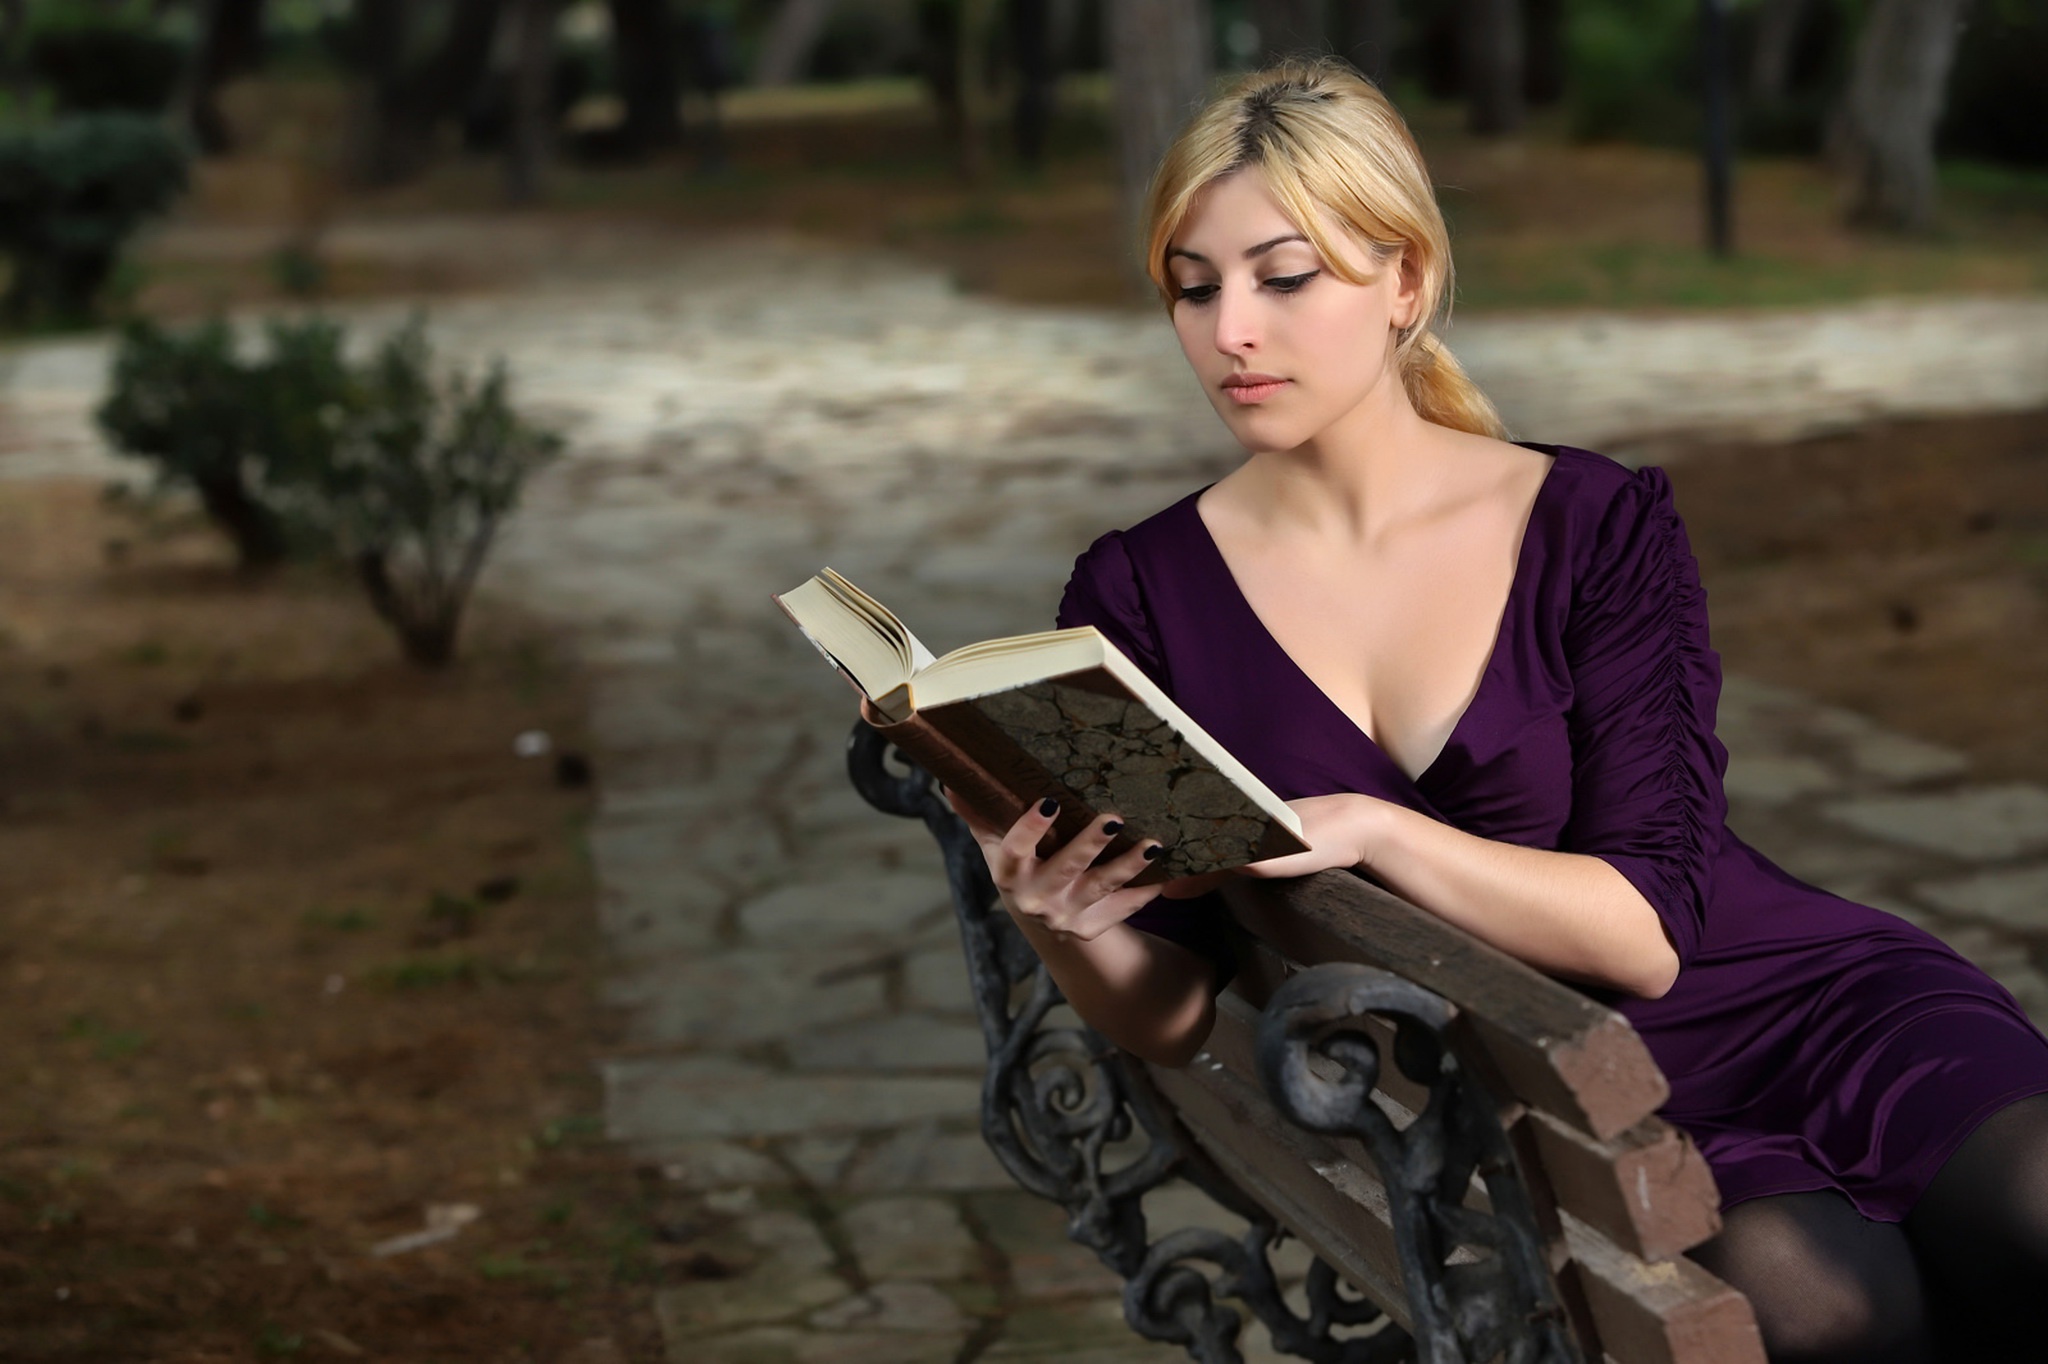 People 2048x1364 reading books blonde bench women outdoors model violet dress women outdoors dyed hair